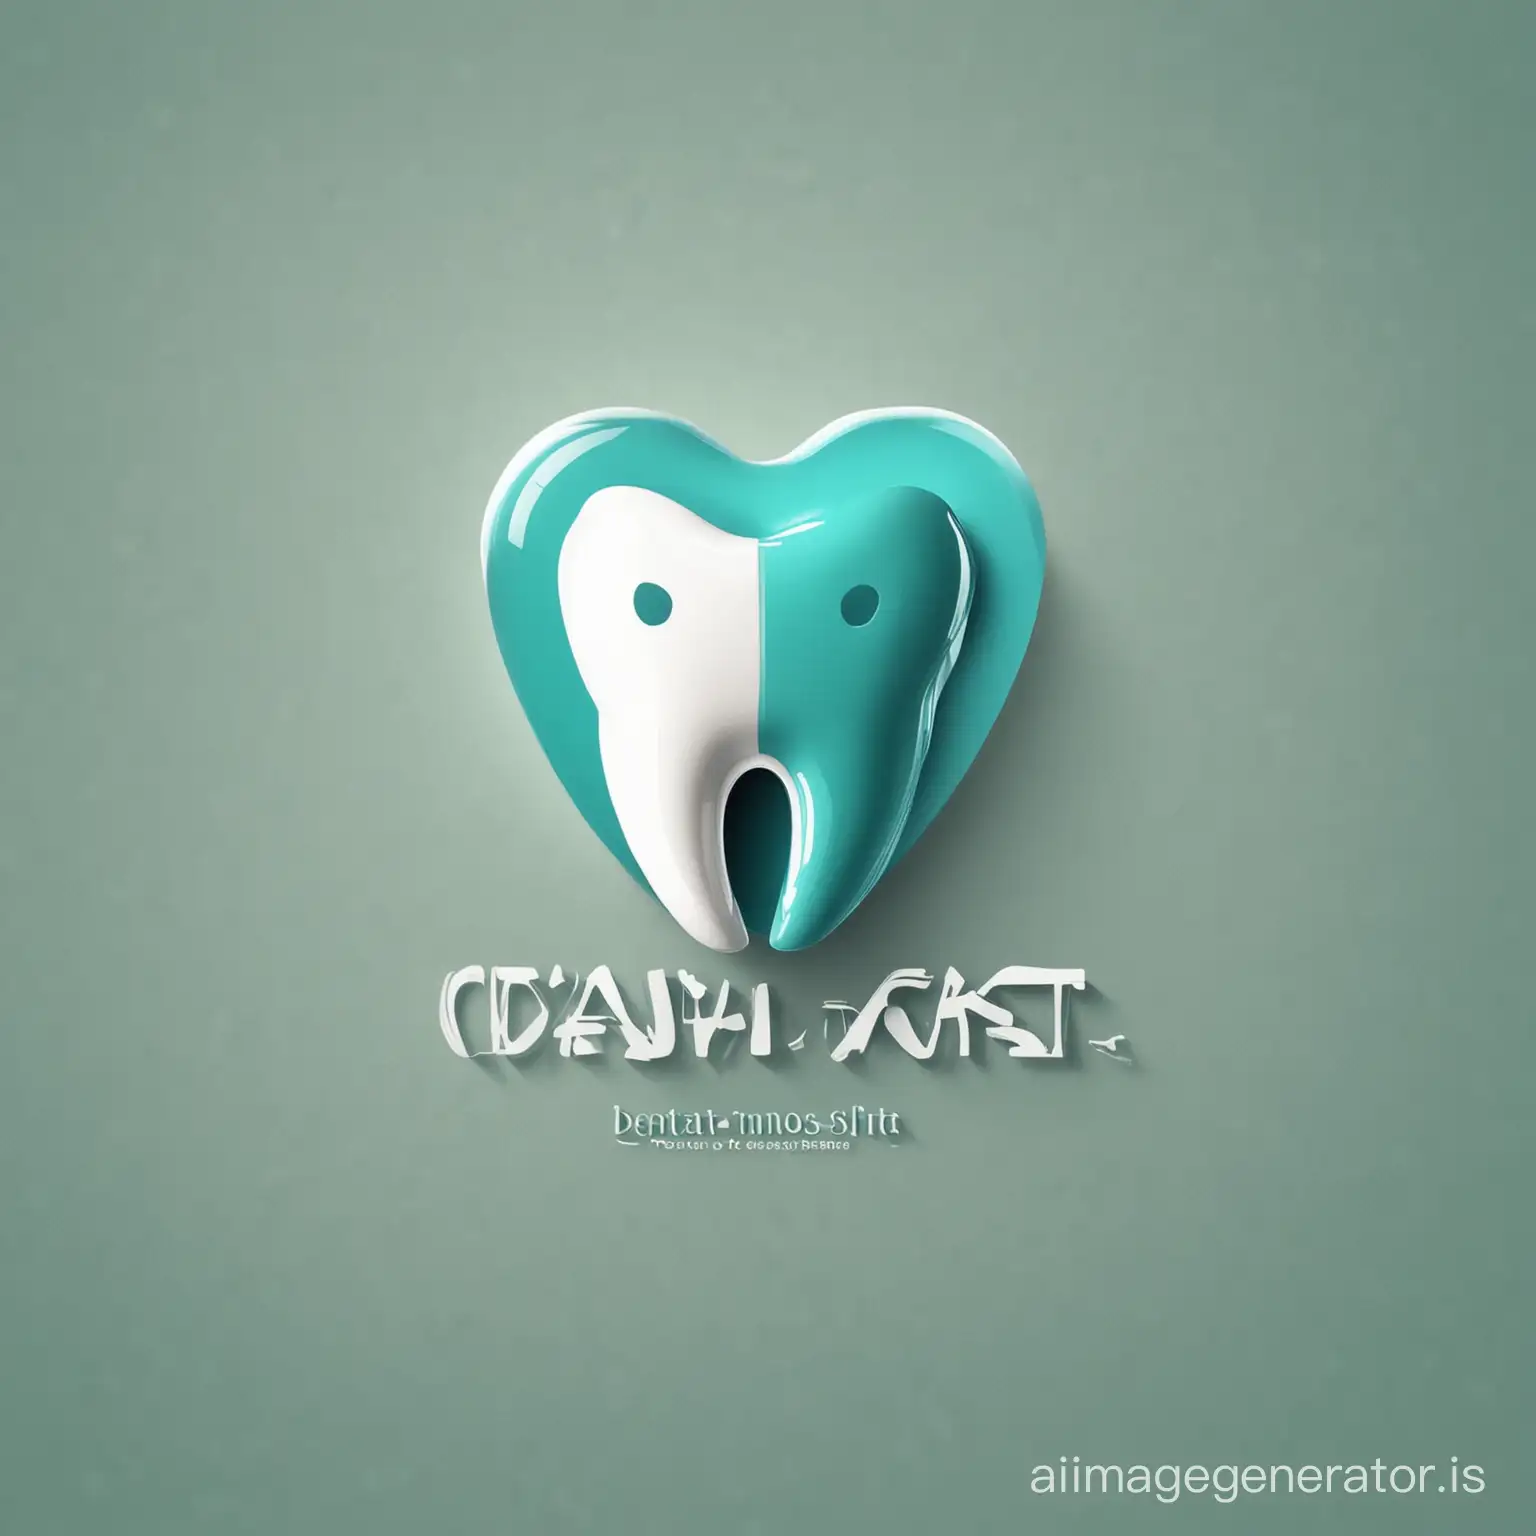 Modern-Dental-Clinic-Logo-Design-with-Tooth-and-Heart-Icon